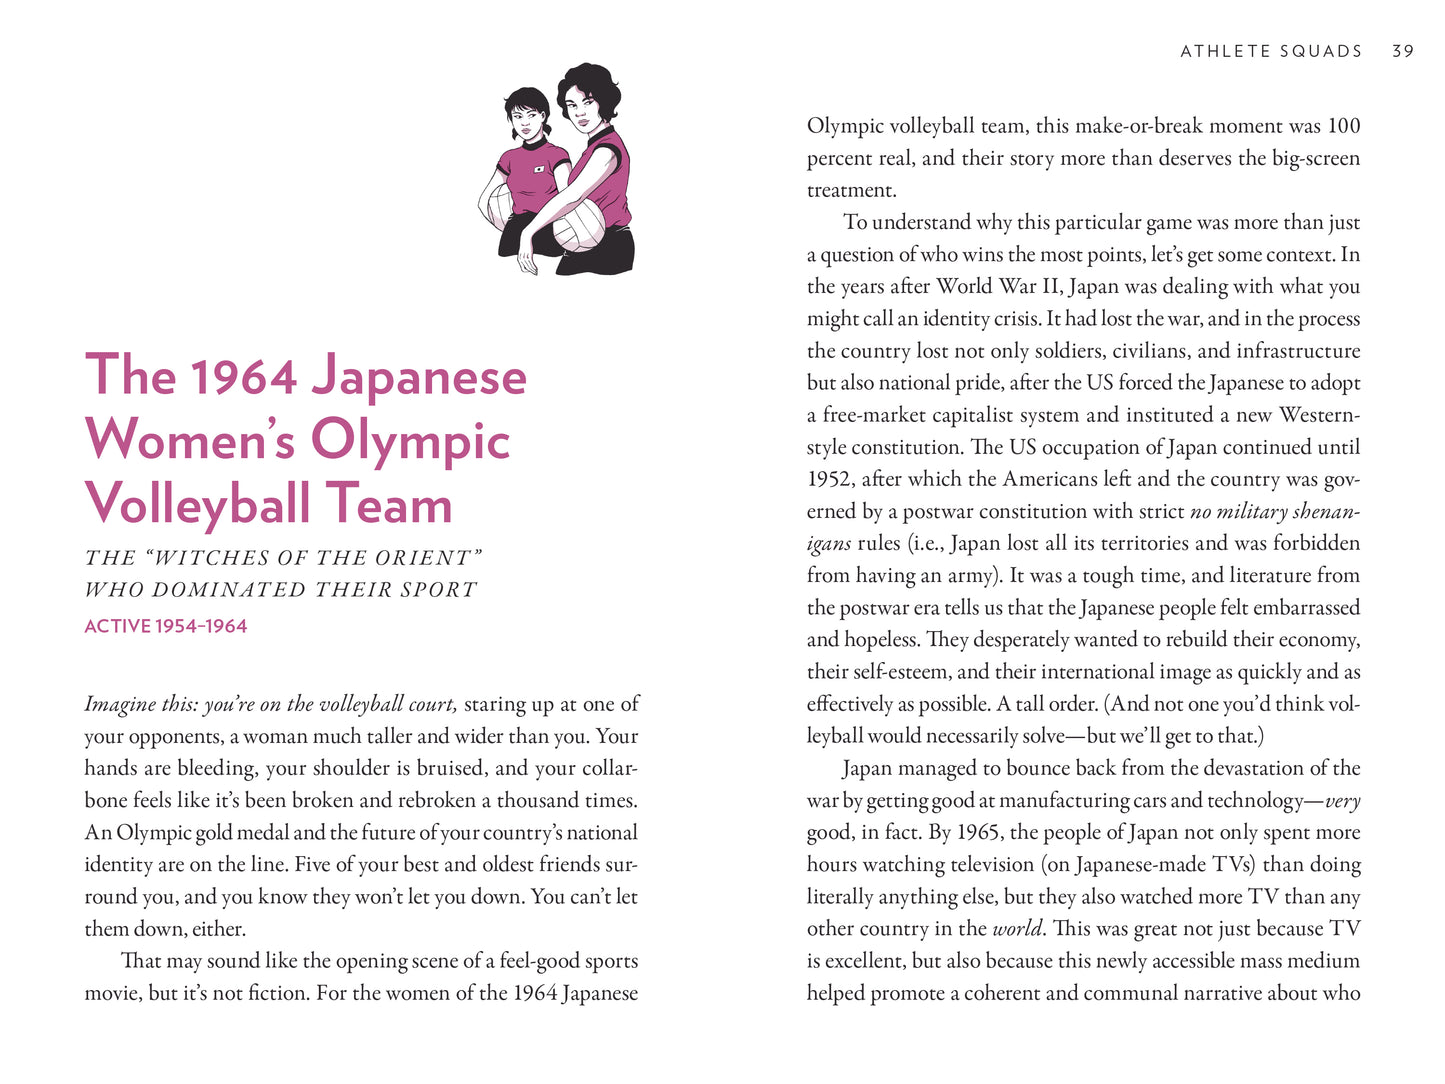 First pages of "The 1964 Japanese Women's Olympic Volleyball Team."